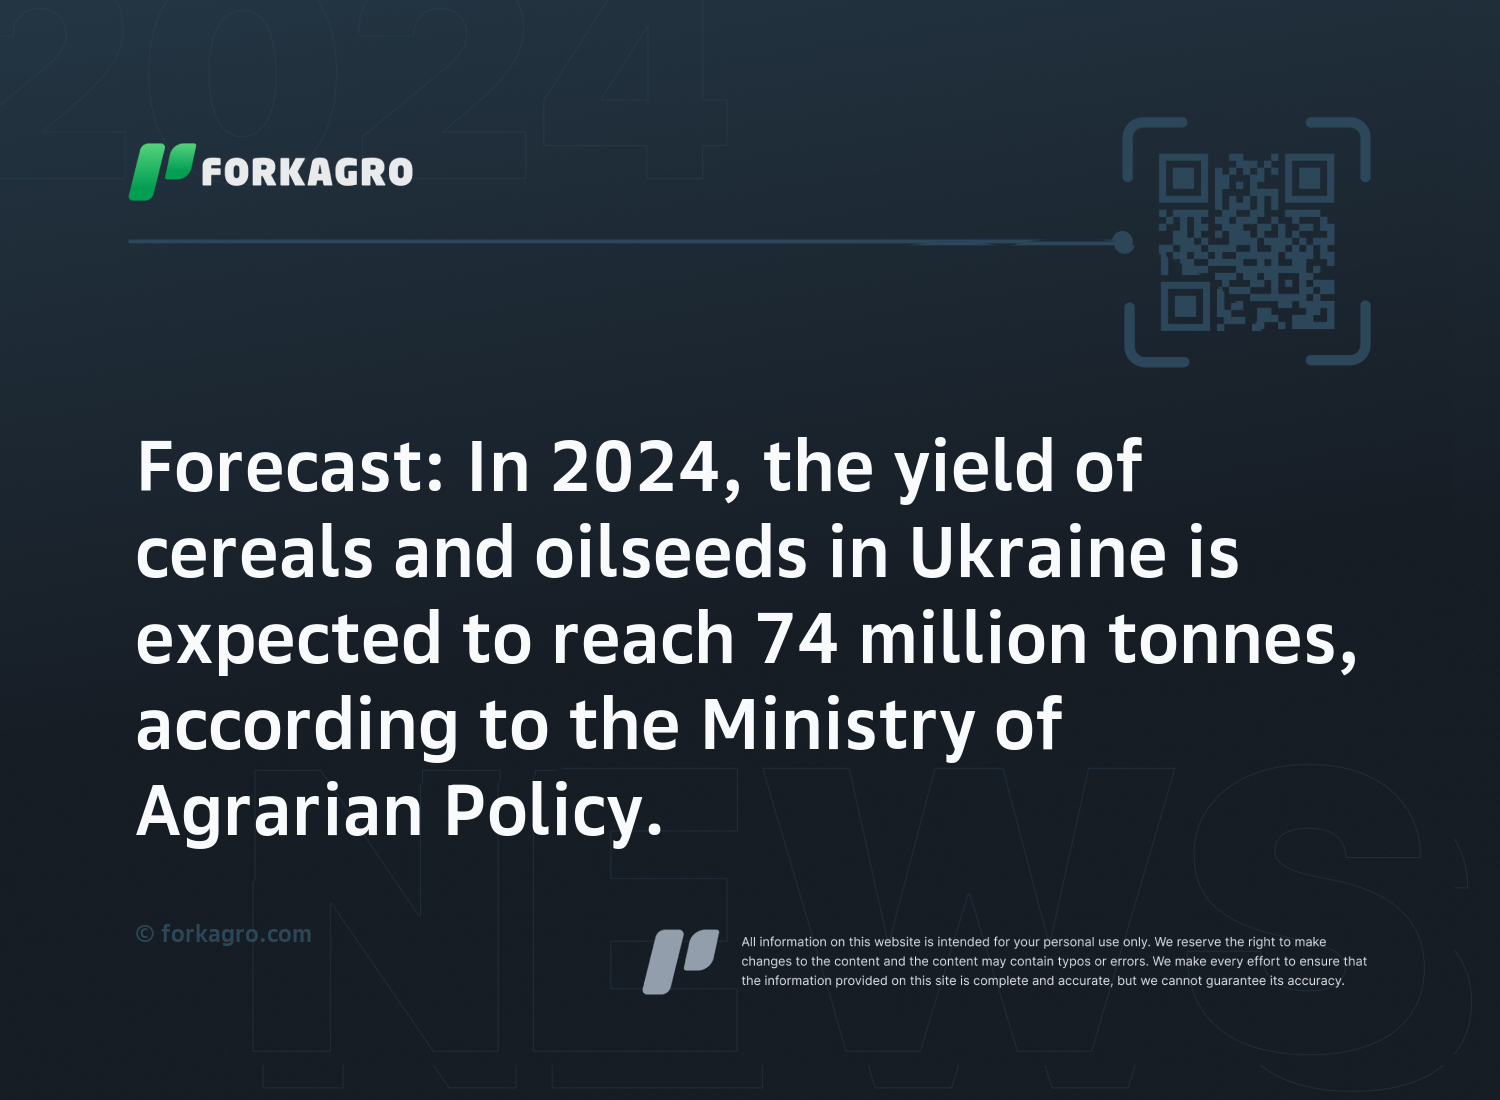 Forecast: In 2024, the yield of cereals and oilseeds in Ukraine is expected to reach 74 million tonnes, according to the Ministry of Agrarian Policy.